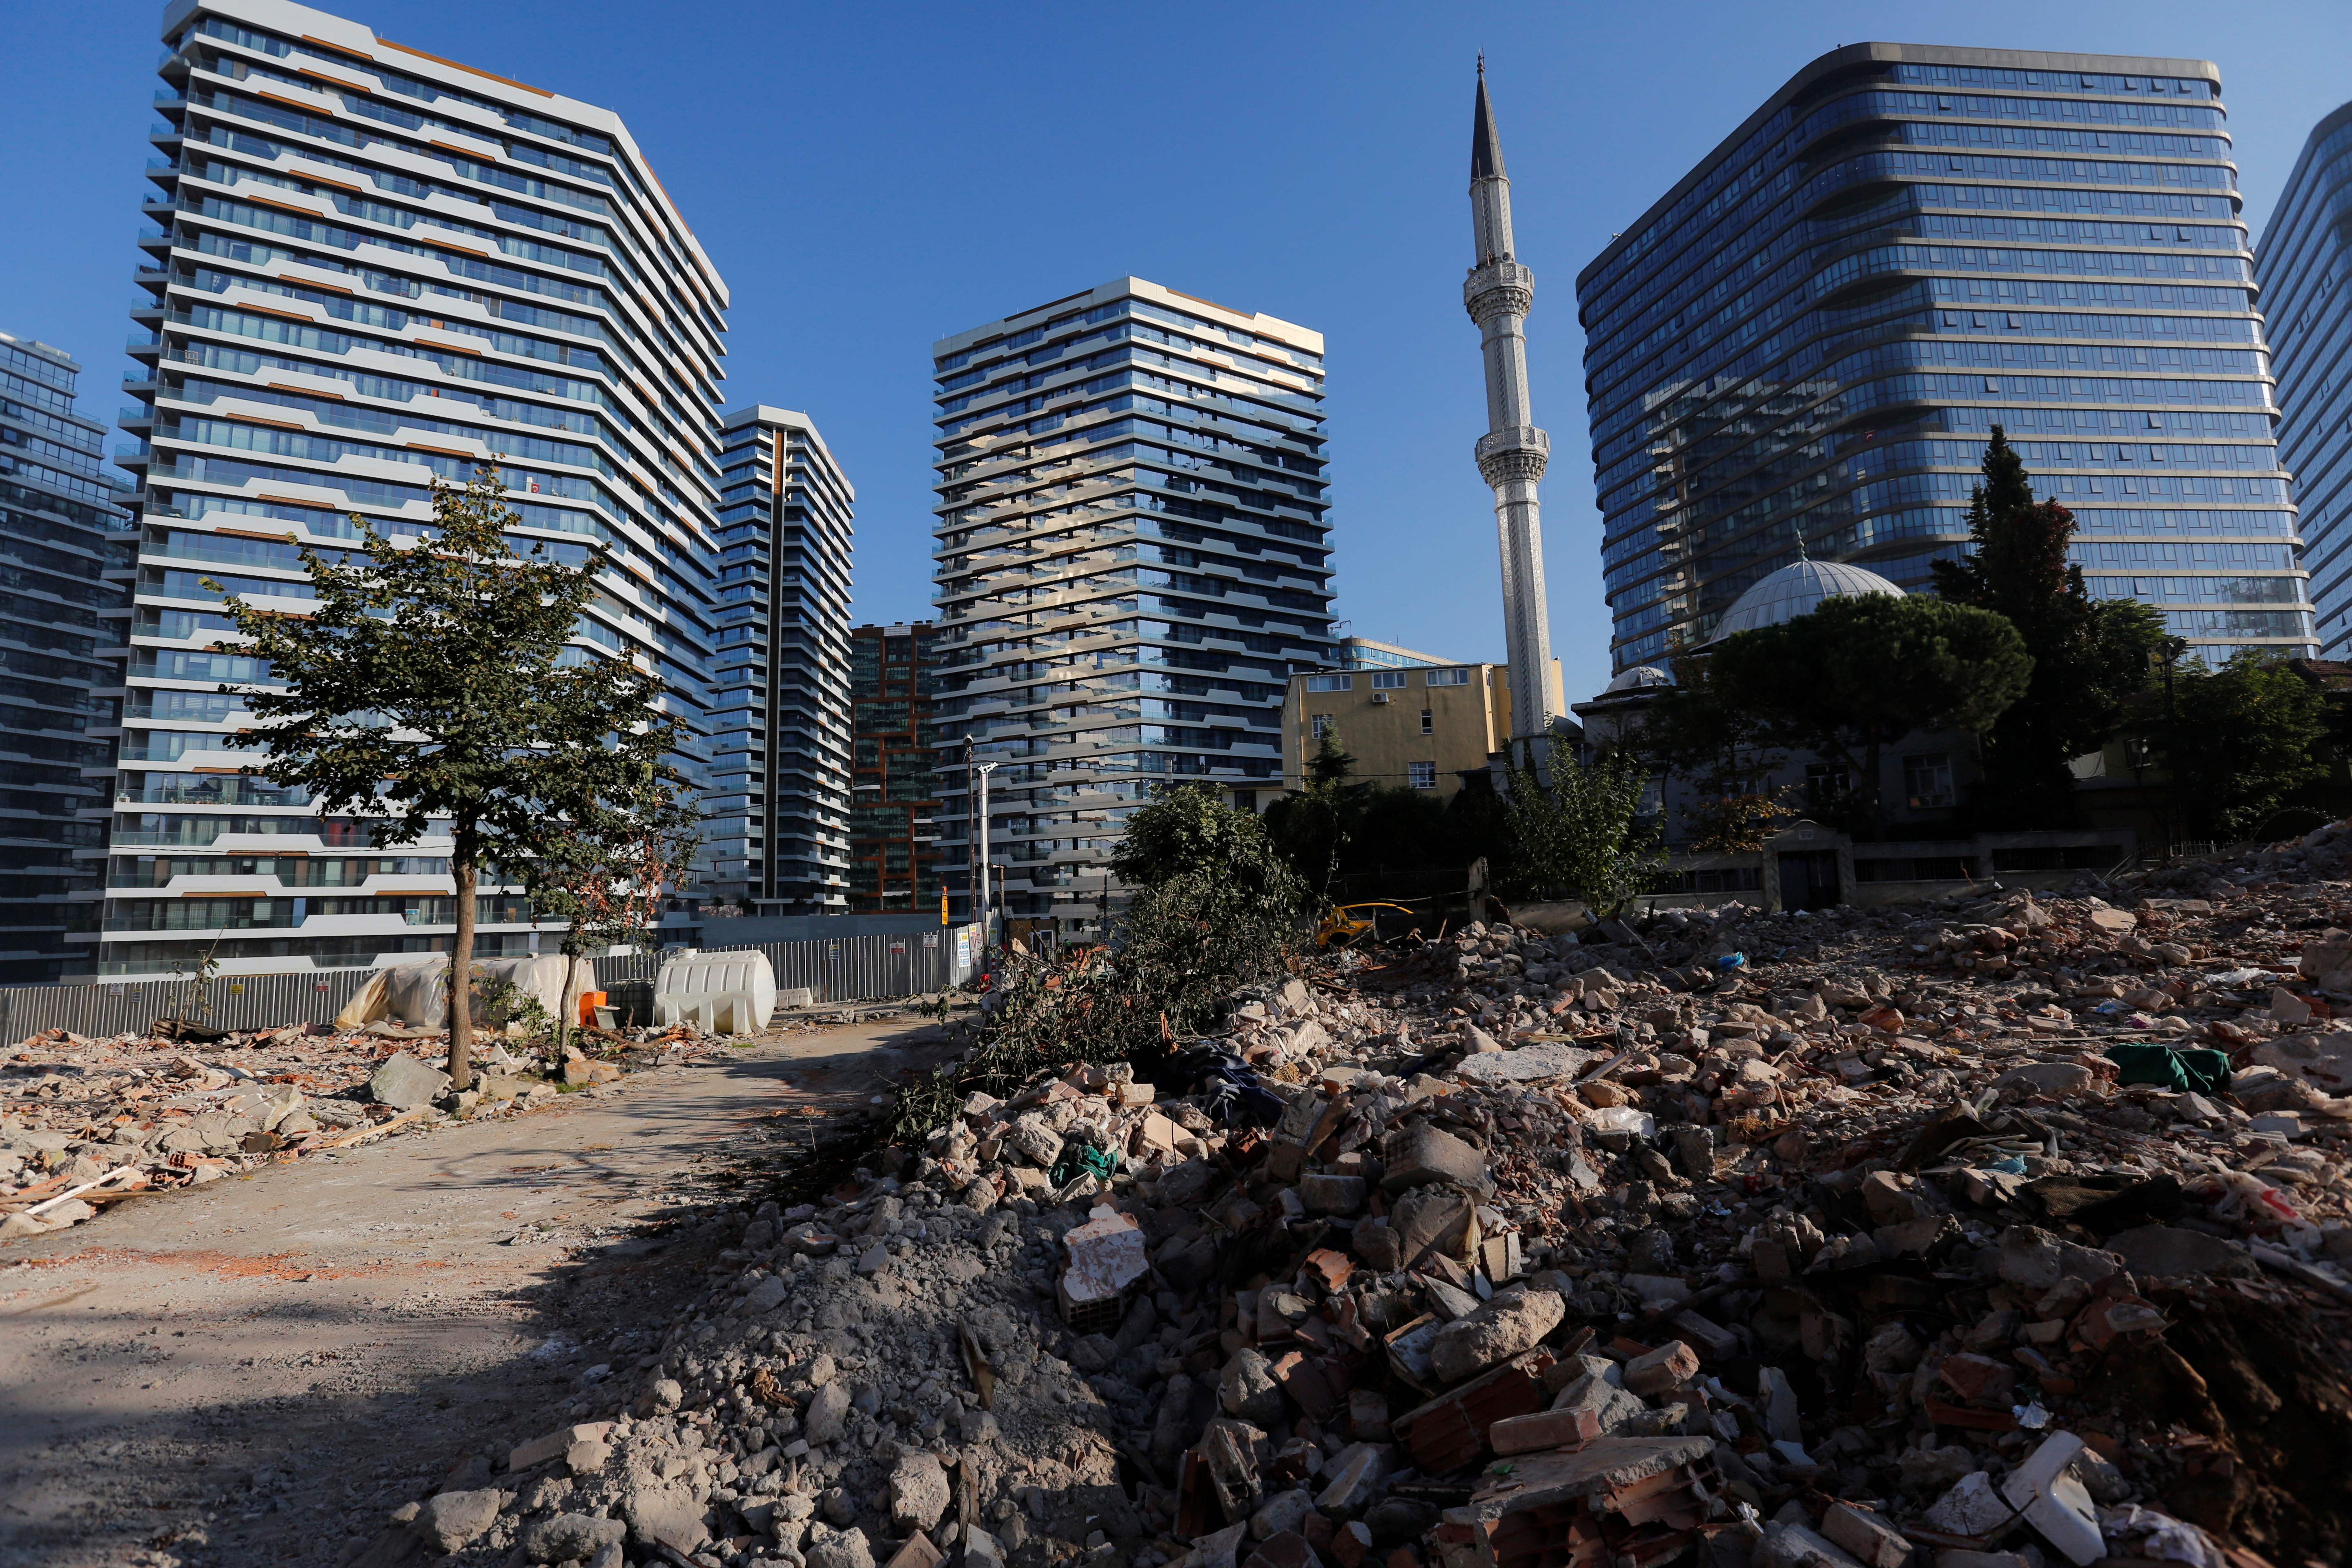 Debris from houses is seen in front of brand new residential buildings at an urban transformation project area in Istanbul